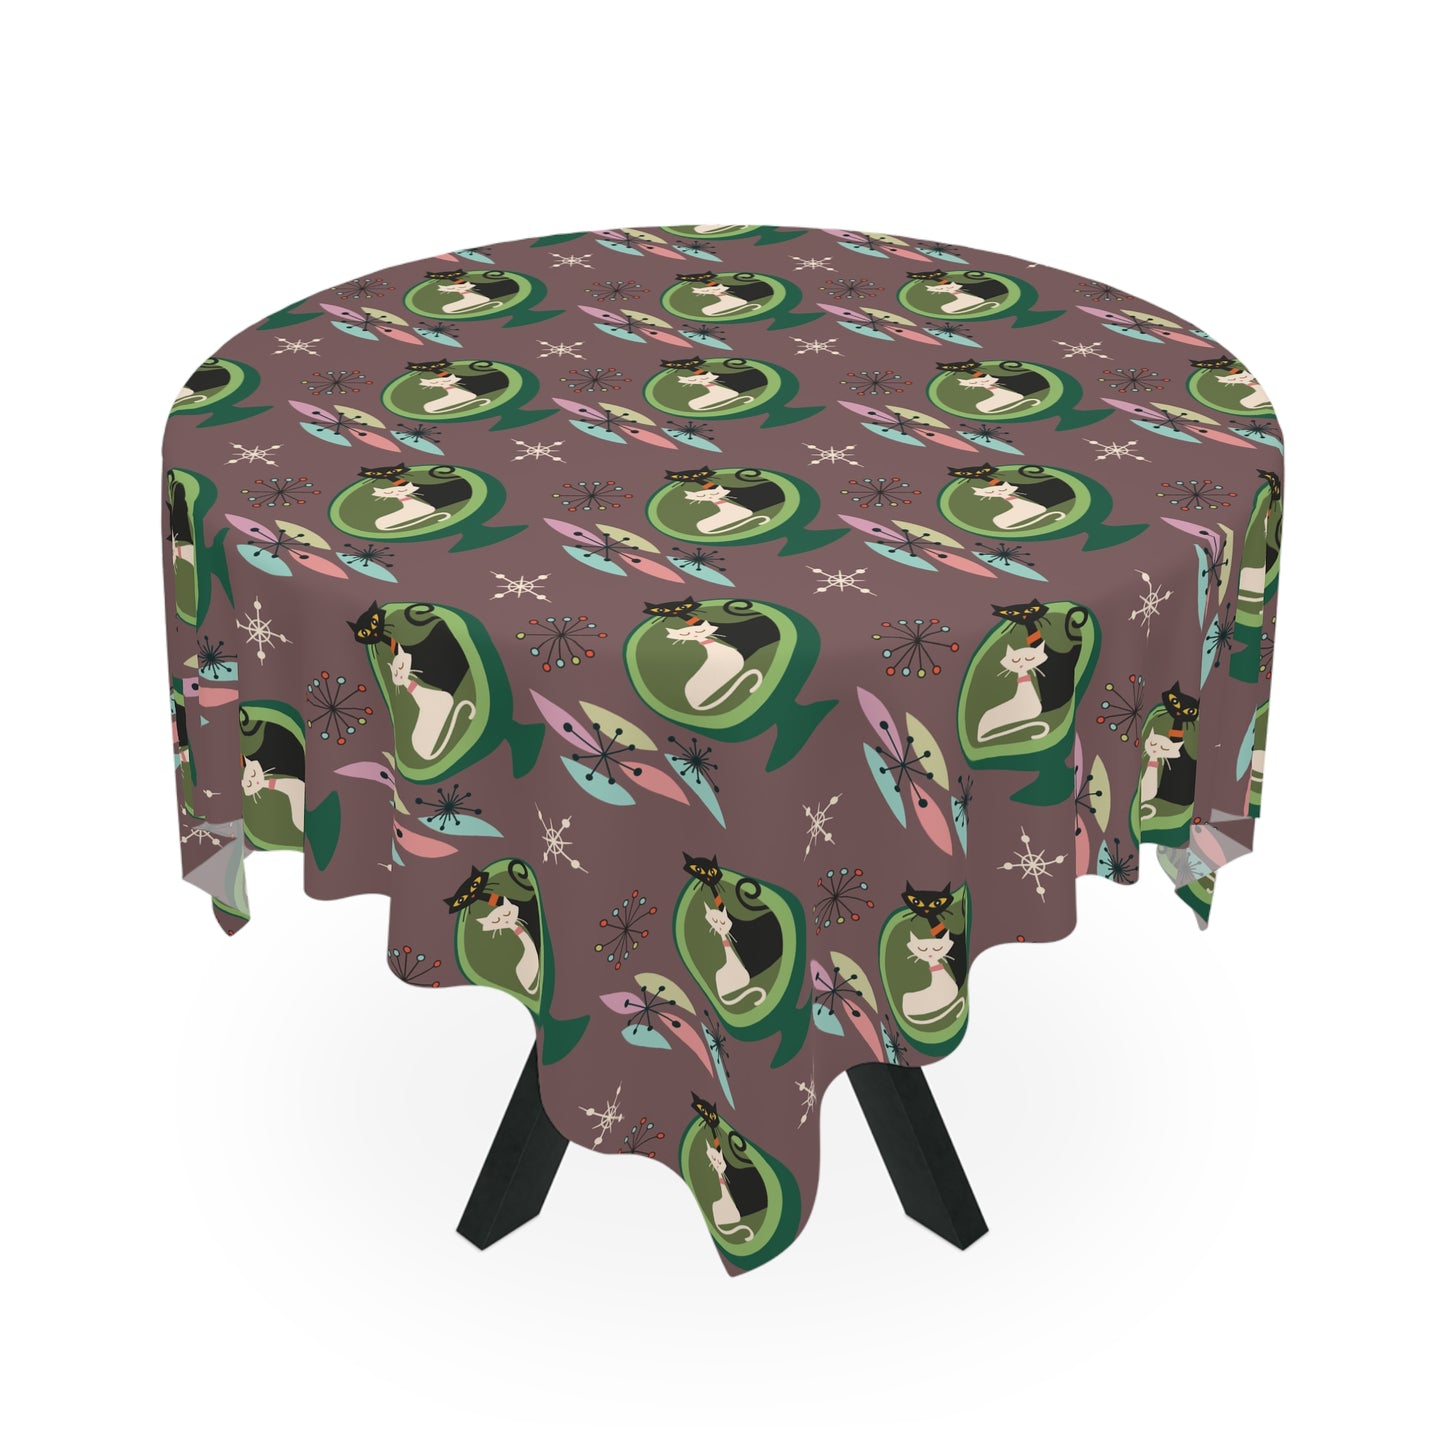 Retro 50s Space Age Atomic Cats in Ball Chair, Mid Century Mod Taupe Tablecloth